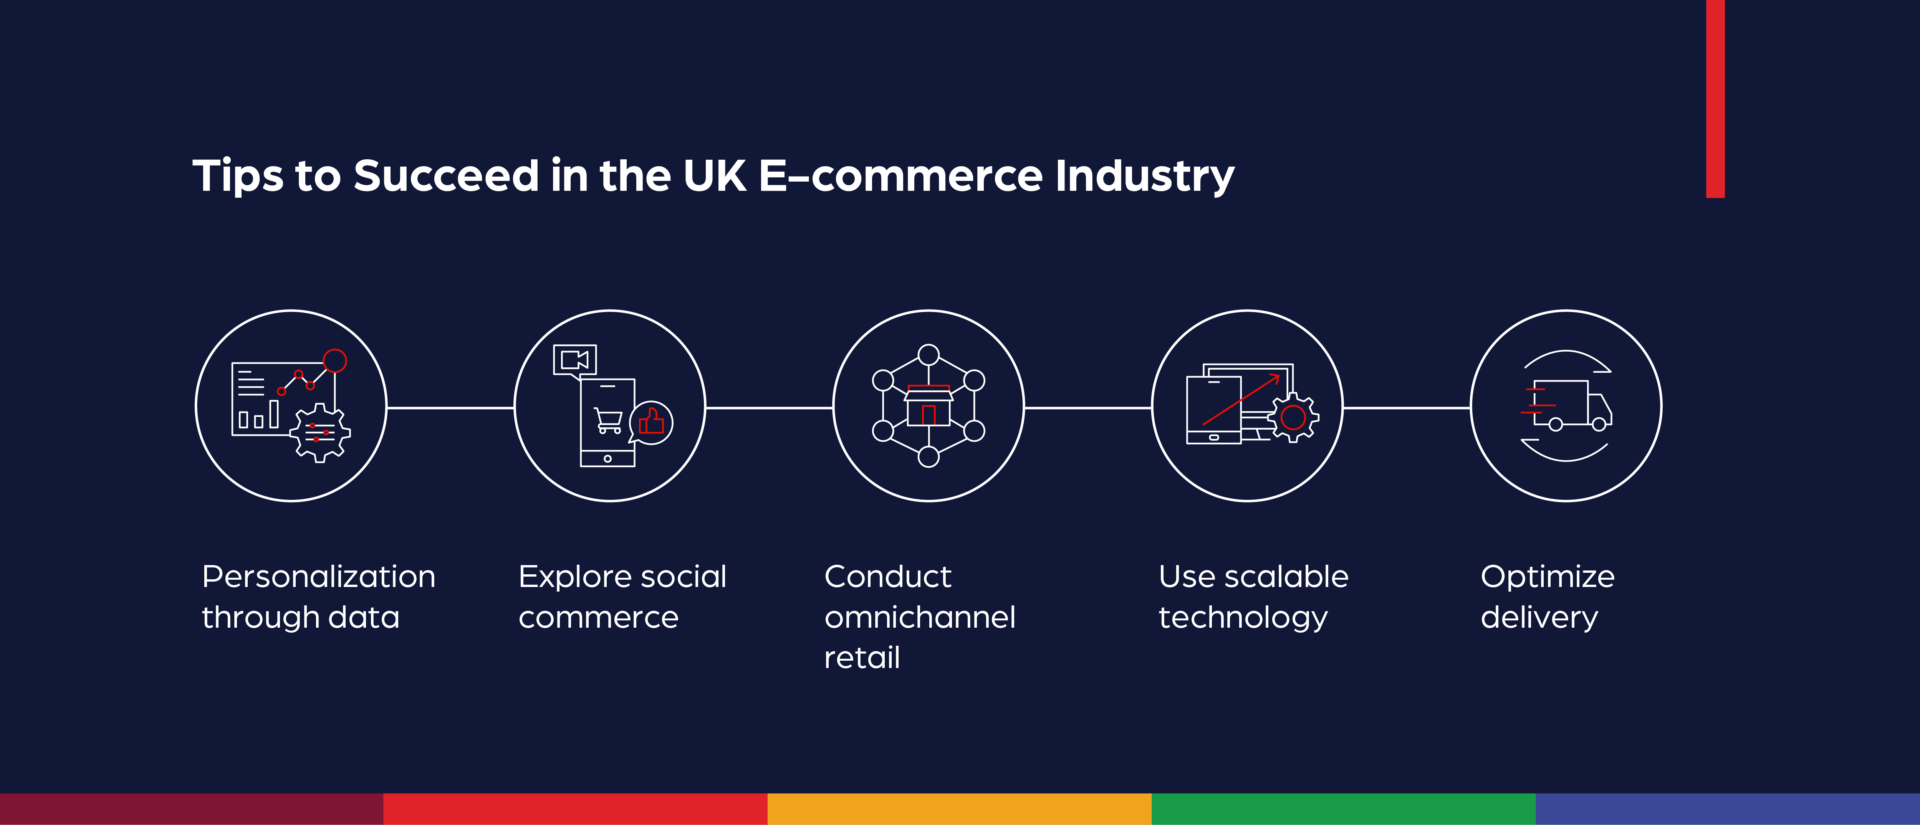 Tips-to-succeed-in-the-UK-e-commerce-market